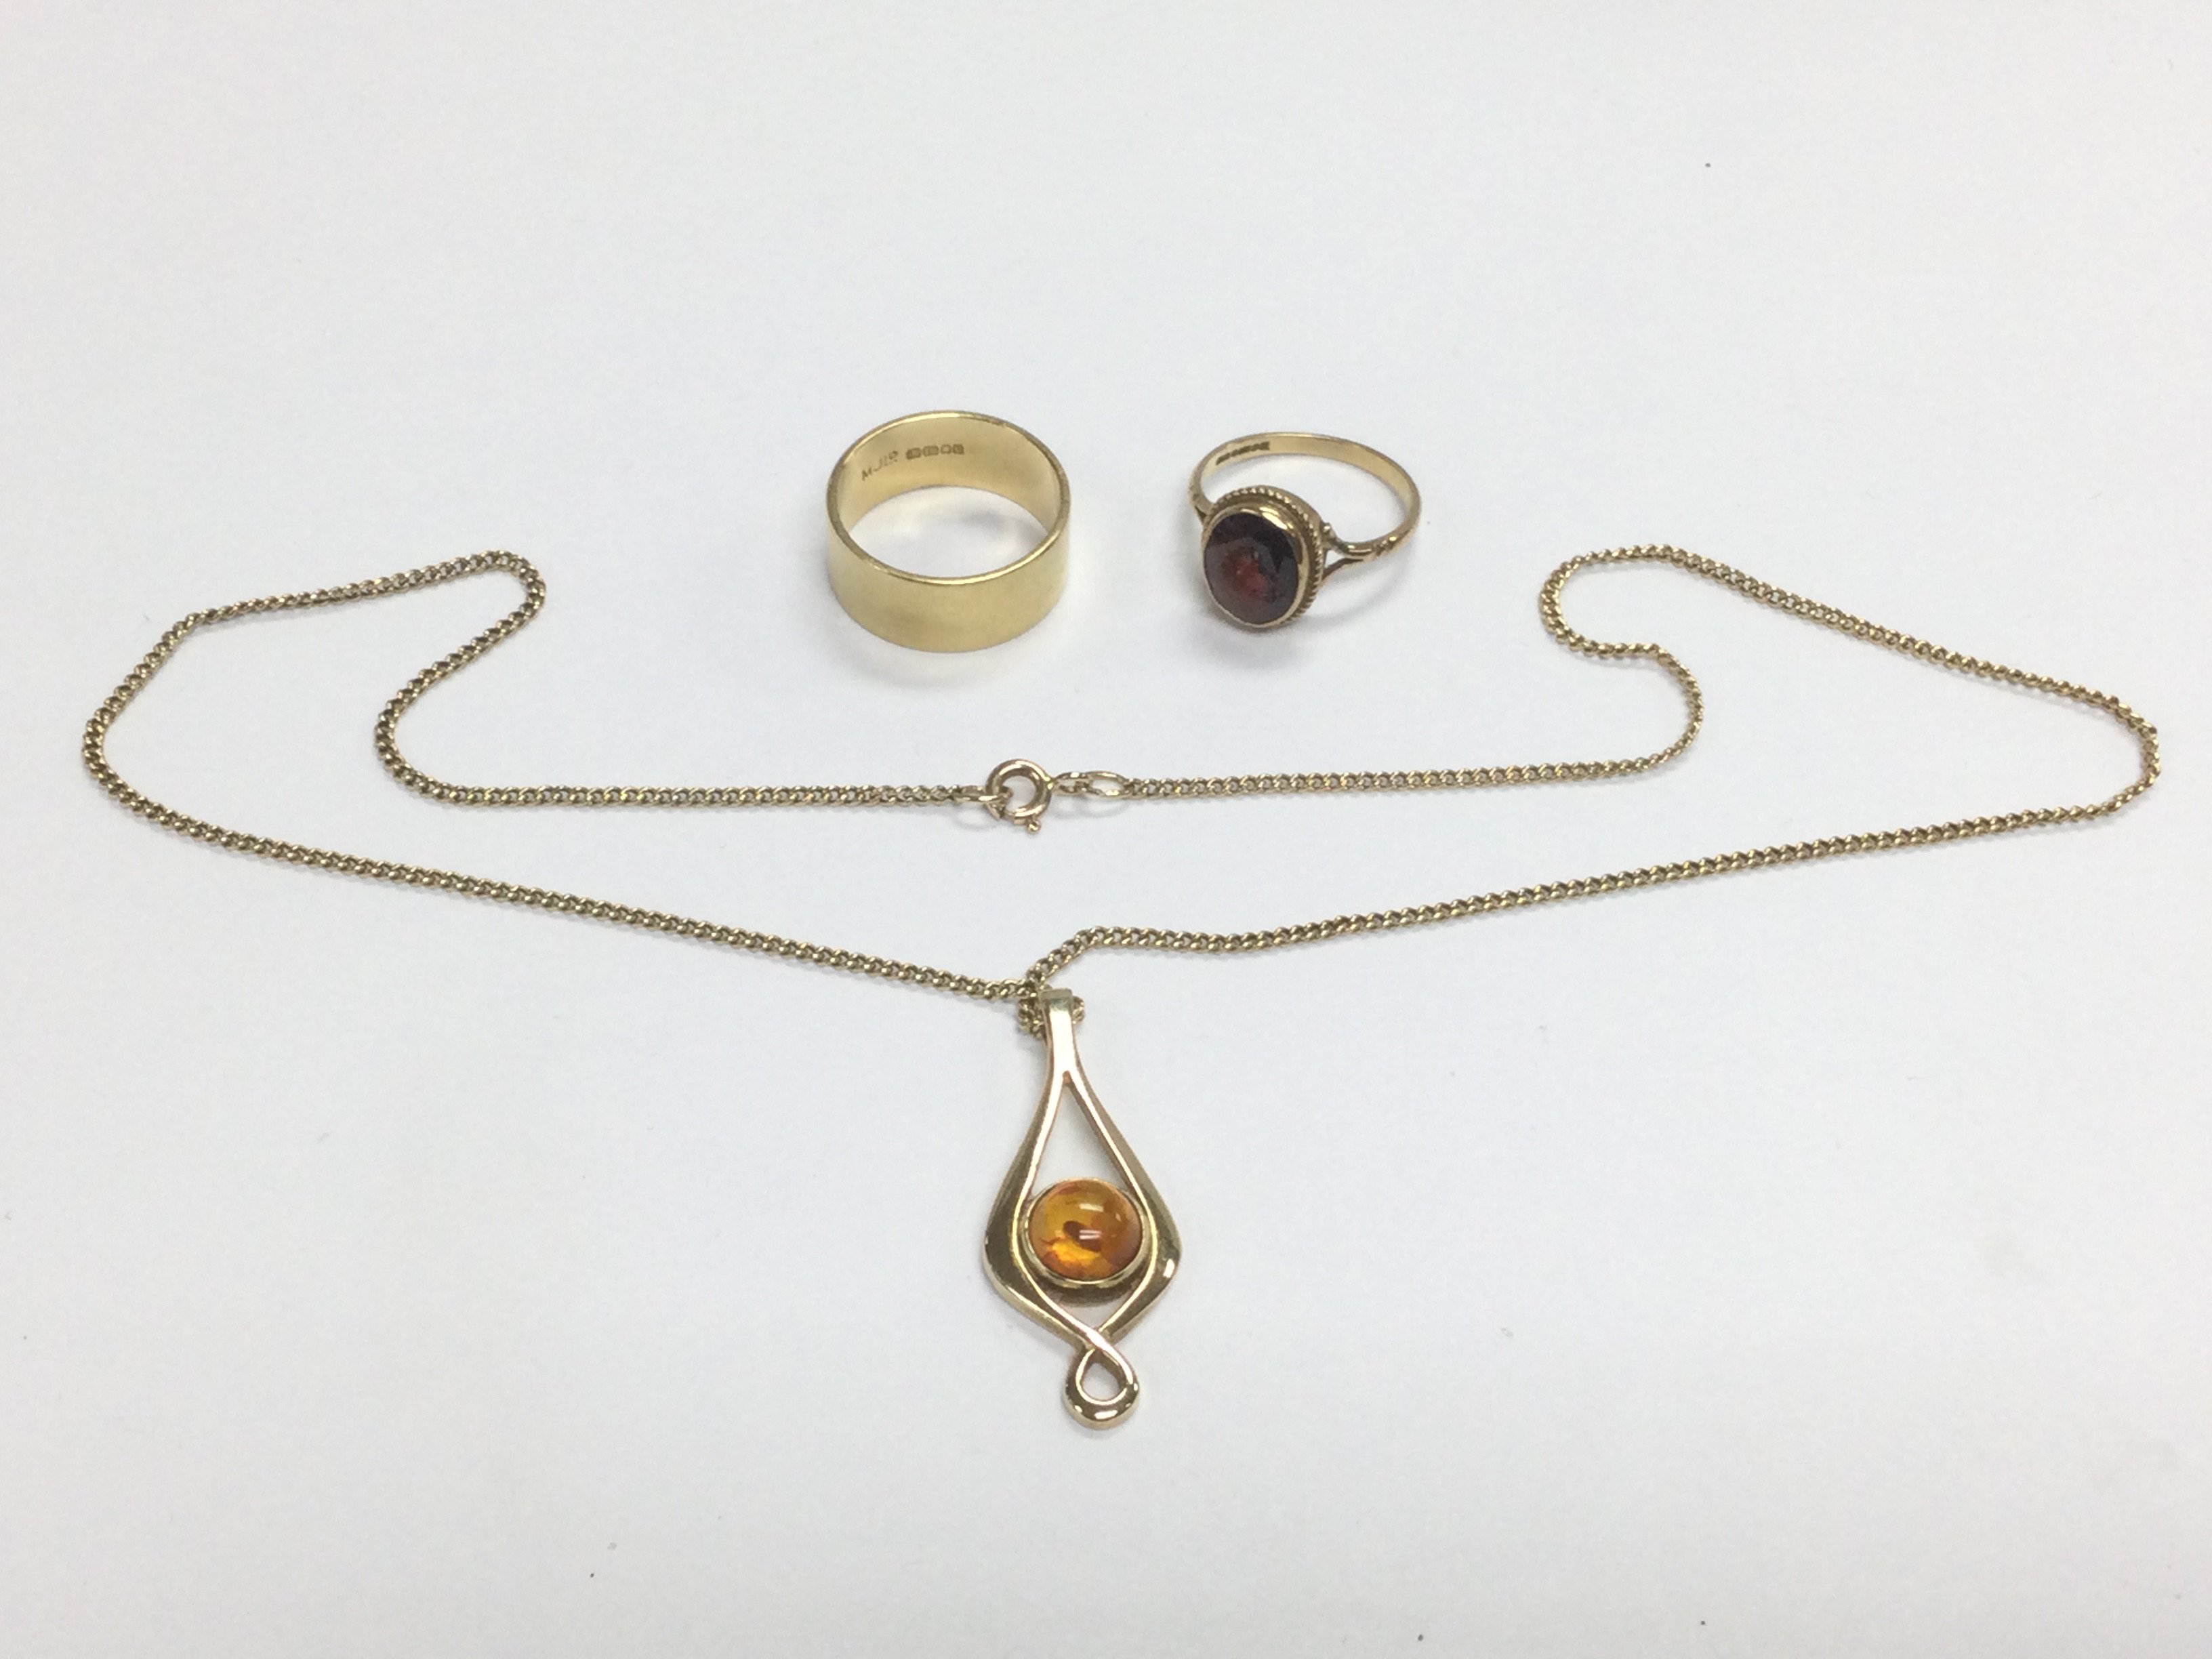 A gold and amber pendant, an 18ct gold wedding ban